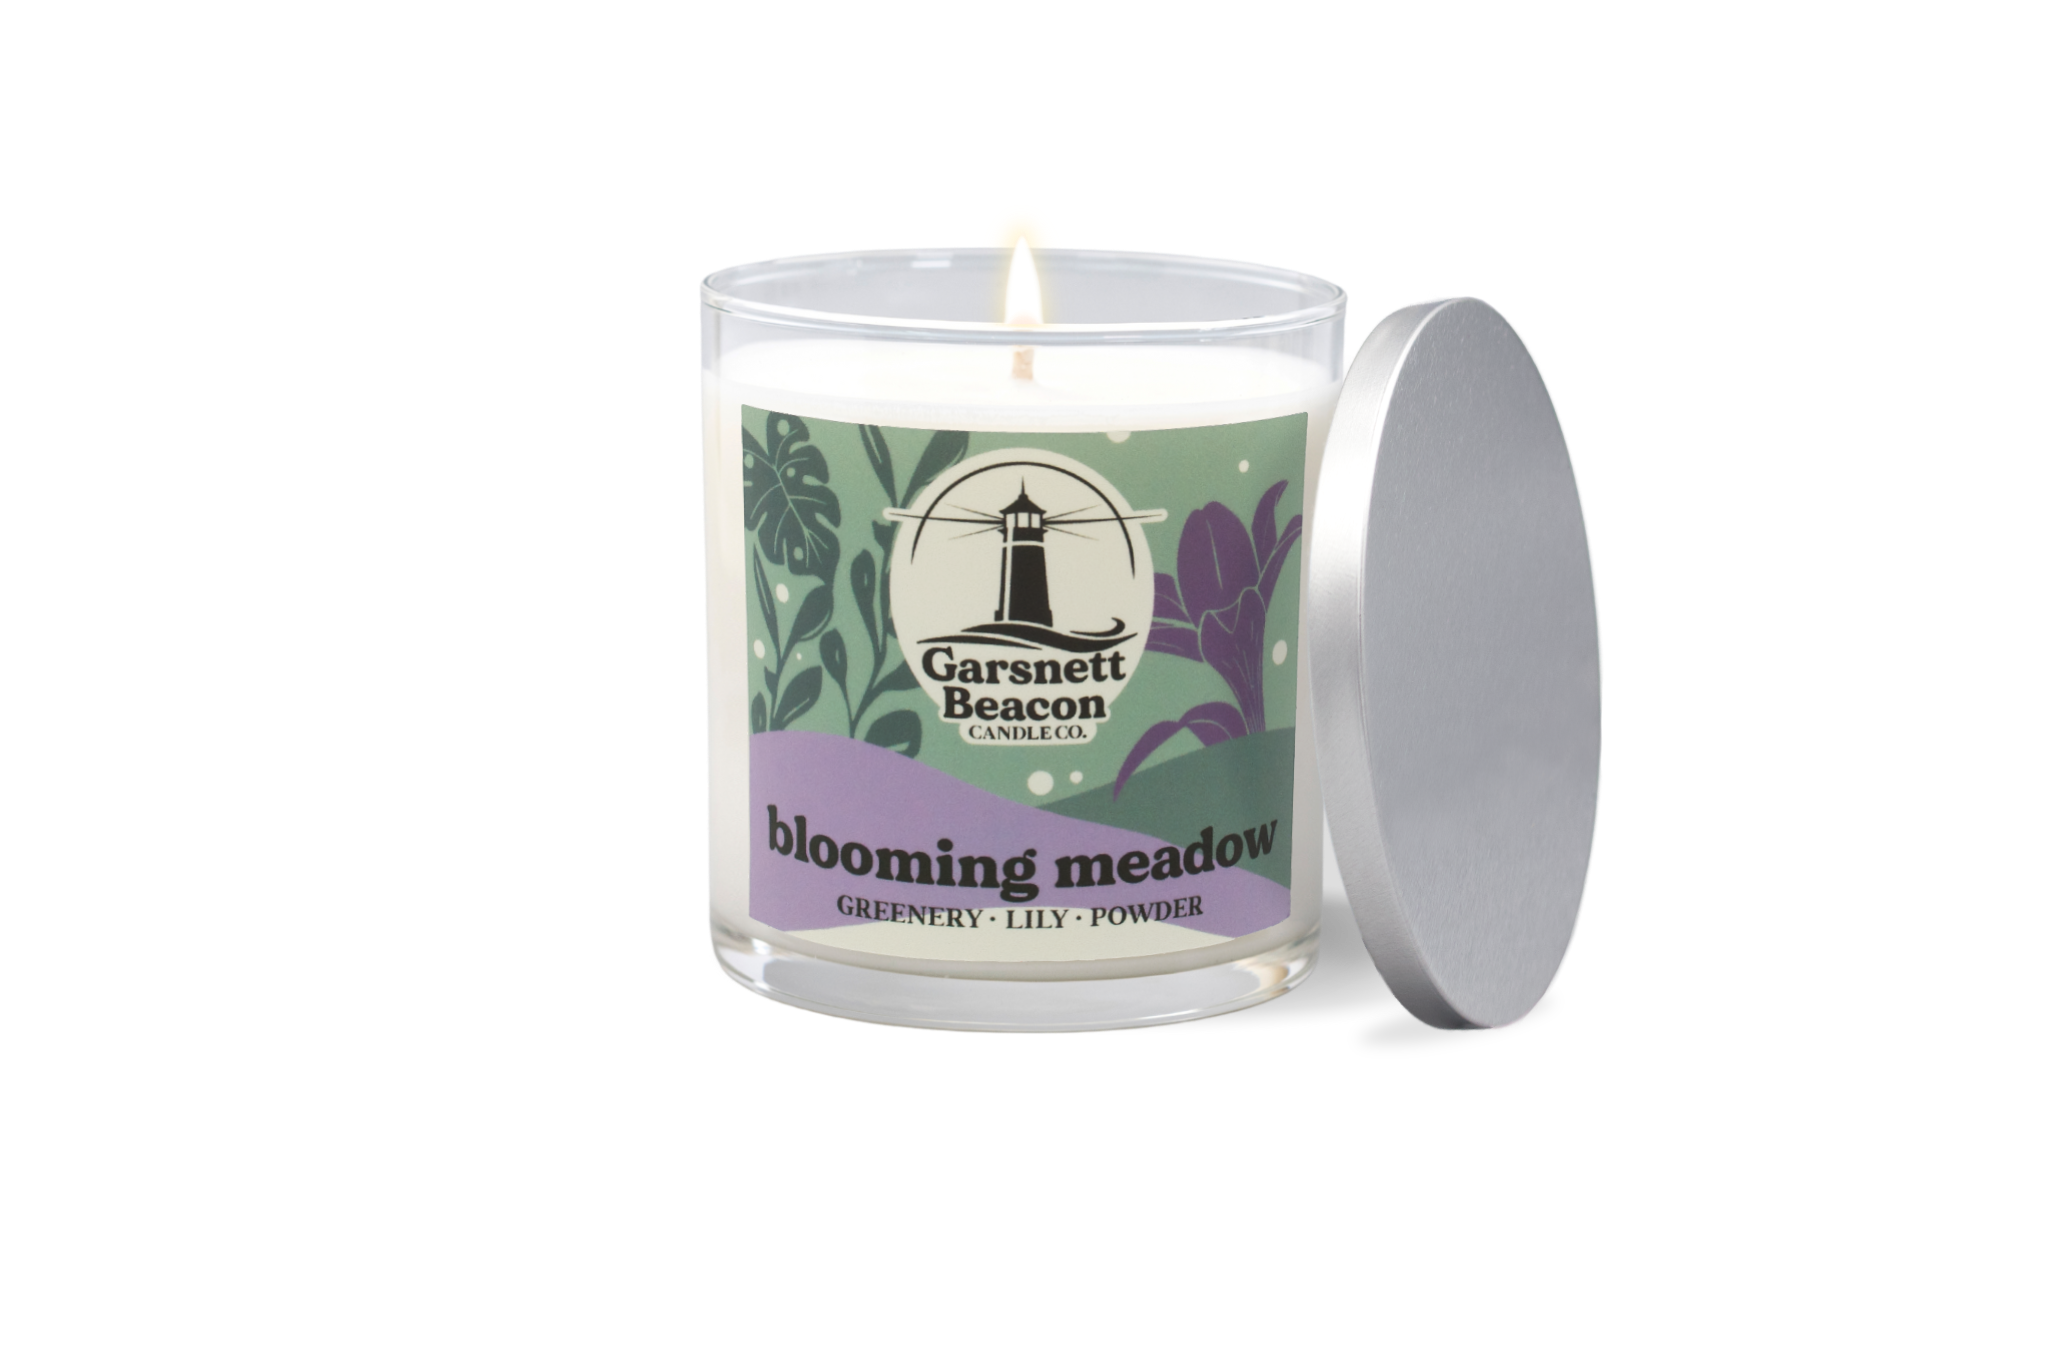 Blooming Meadow Candle - Floral, Lily, Powder Scent